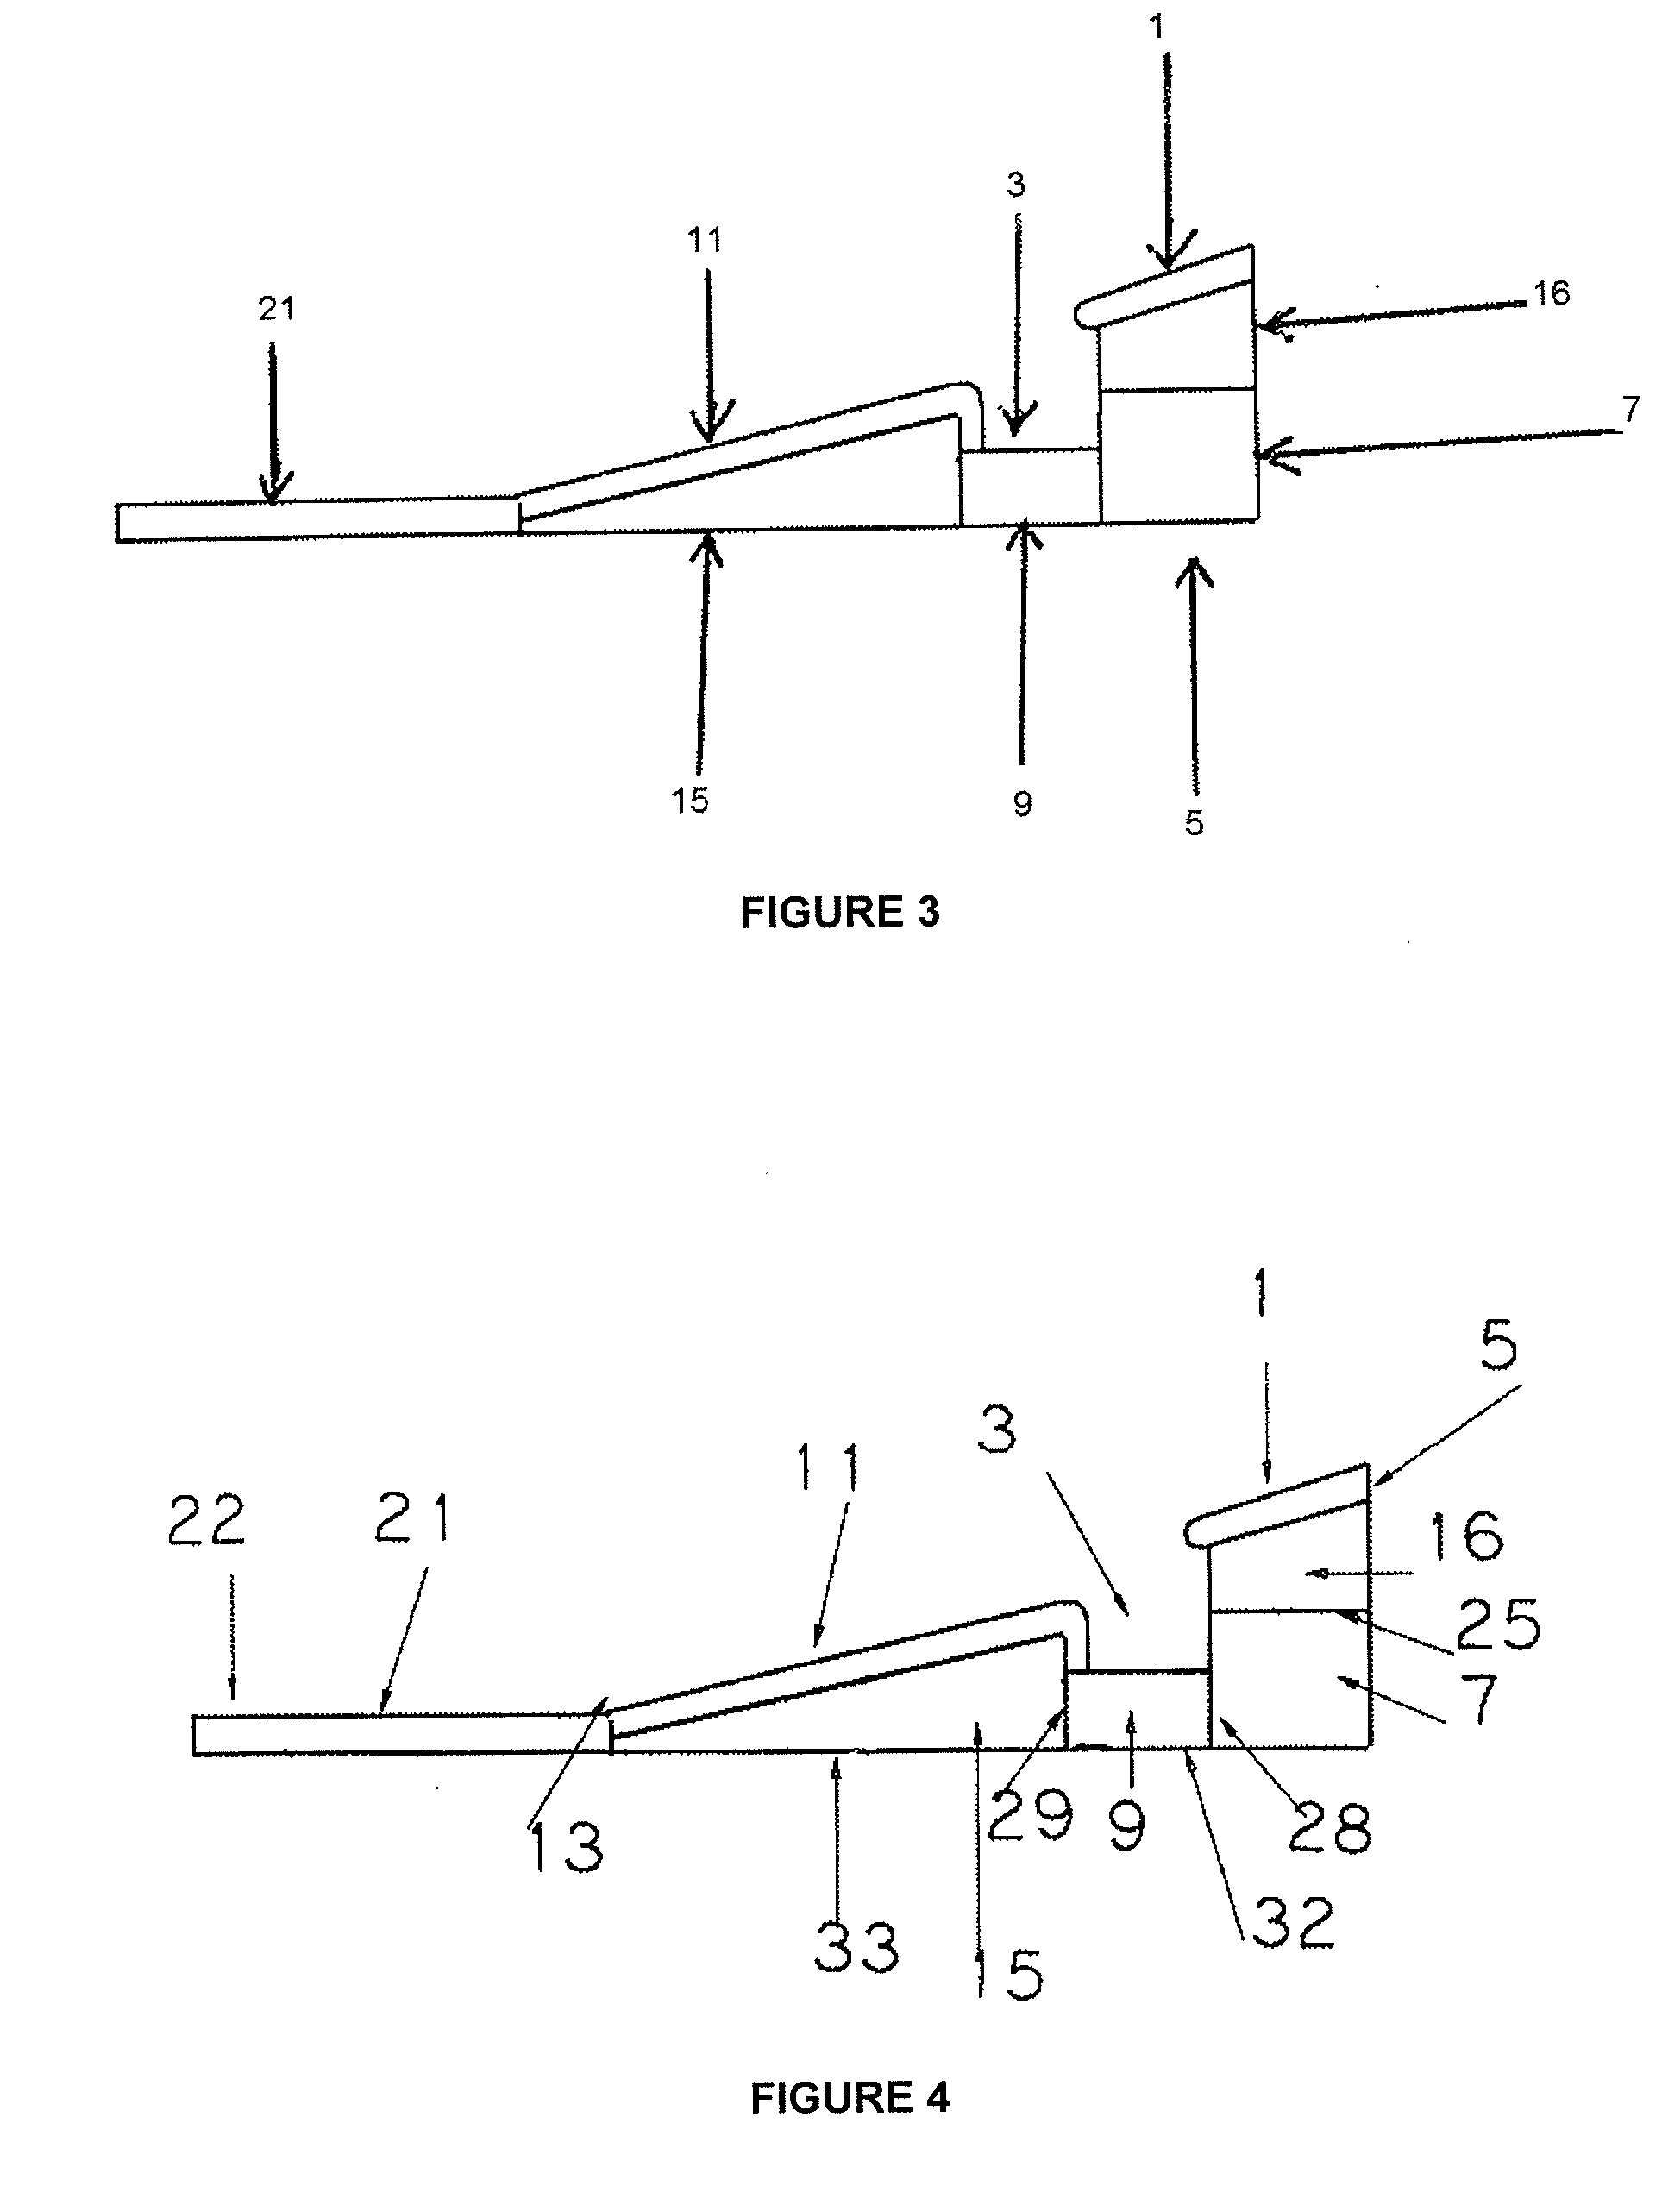 Ergonomic support apparatus and method for assisting sleep